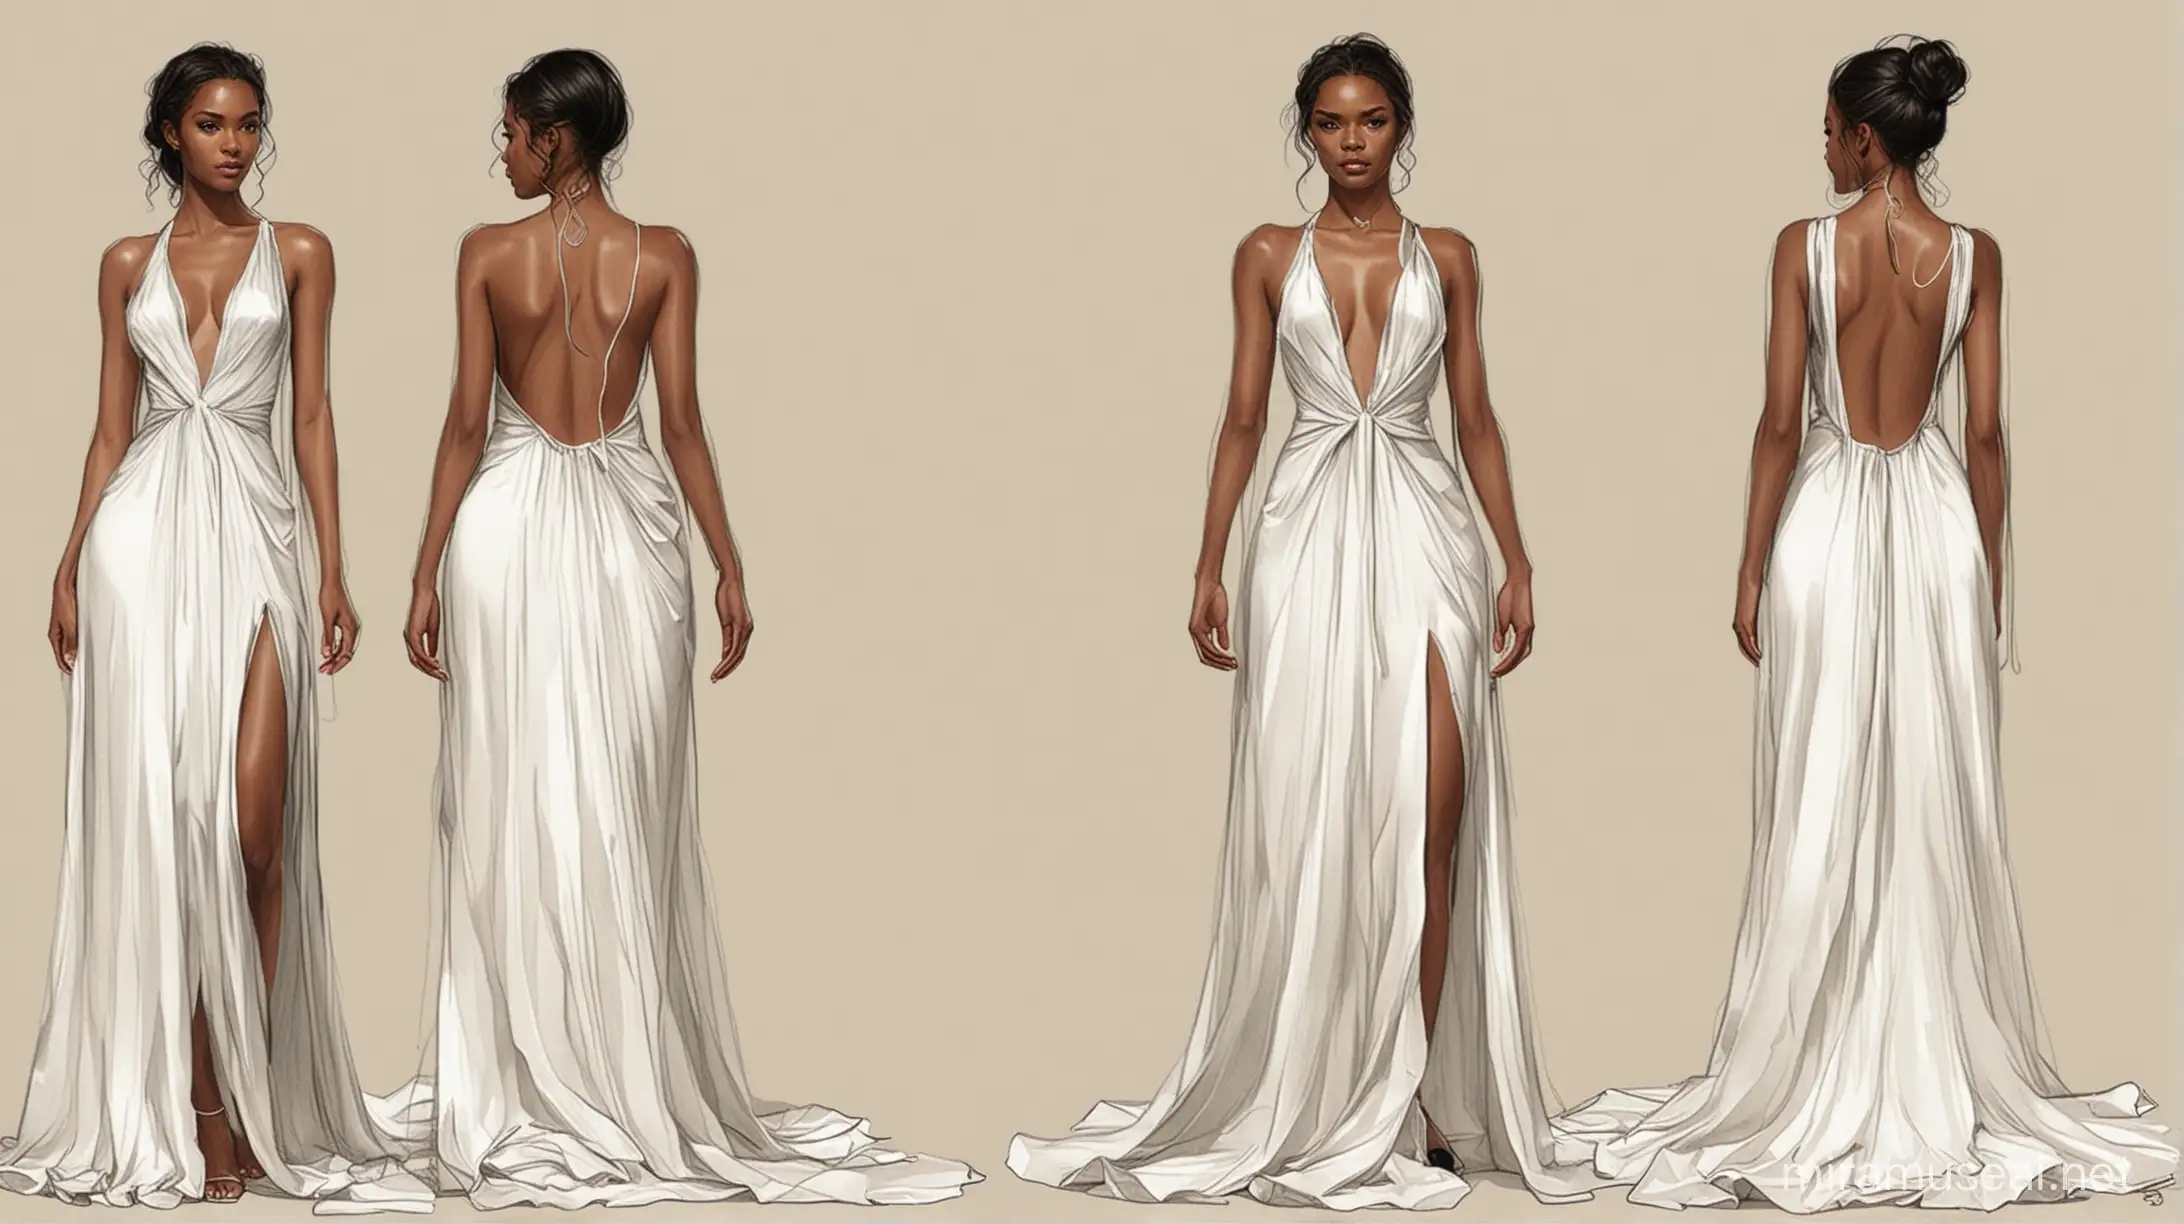 Create a fashion illustration using images you find in google for Africa Brooke. Design a silk dress with a bare back that ties to her neck from the front. Make the bare back very low. Create the silk in a flowing manner with doodles that resemble artistic mark making. Show me an off white dress with black marks.

Good start. 

Can you use a black woman with no hair? 

show me the back of this dress, with a black bold woman

Make the illustration so I can see the back of this dress

Show me full body from this angle

I want to see her entire body. Make the dress so it ties at the neck, and it's a backless long dress

Make the woman bold

Show me a fashion illustration of the dress on the far left in the style of Balenziaga
